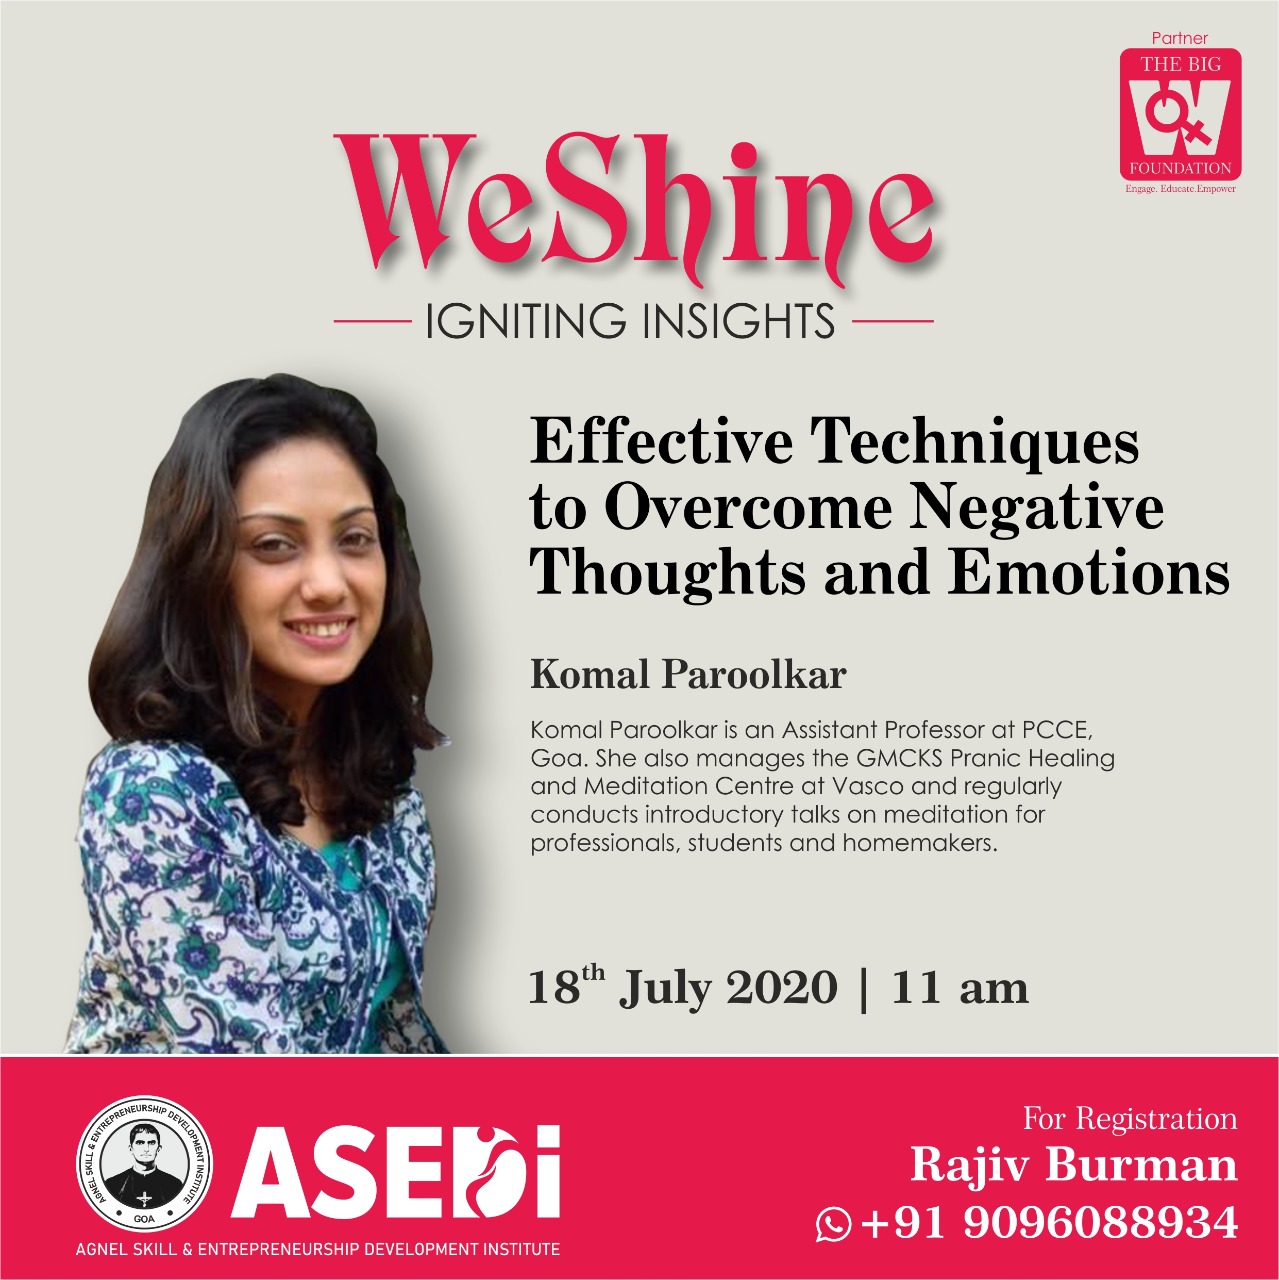 ciba-WeSHINE - Effective Techniques to Overcome Negative Thoughts and Emotions